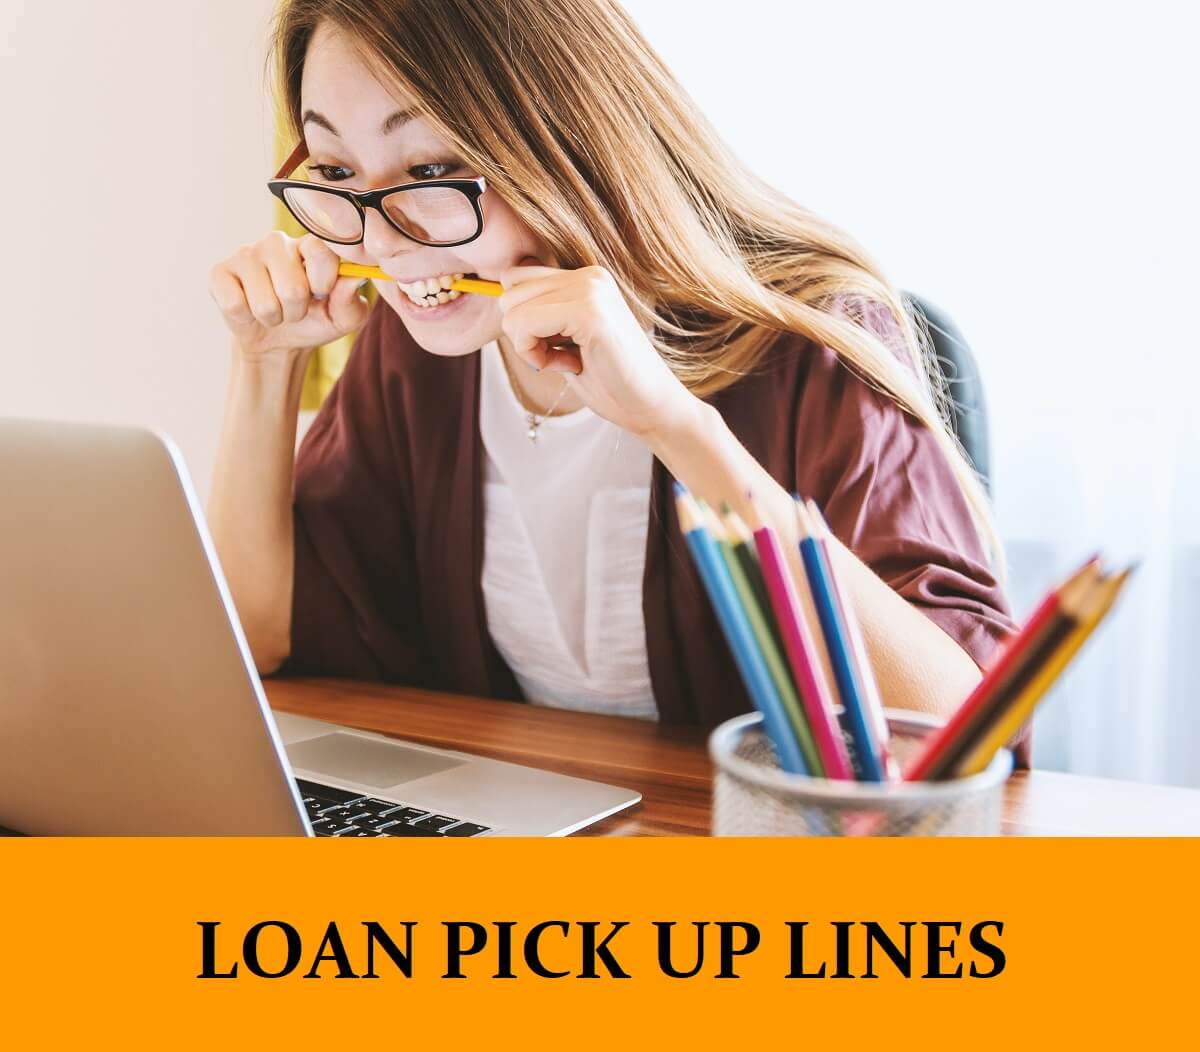 Pick Up Lines About Loans